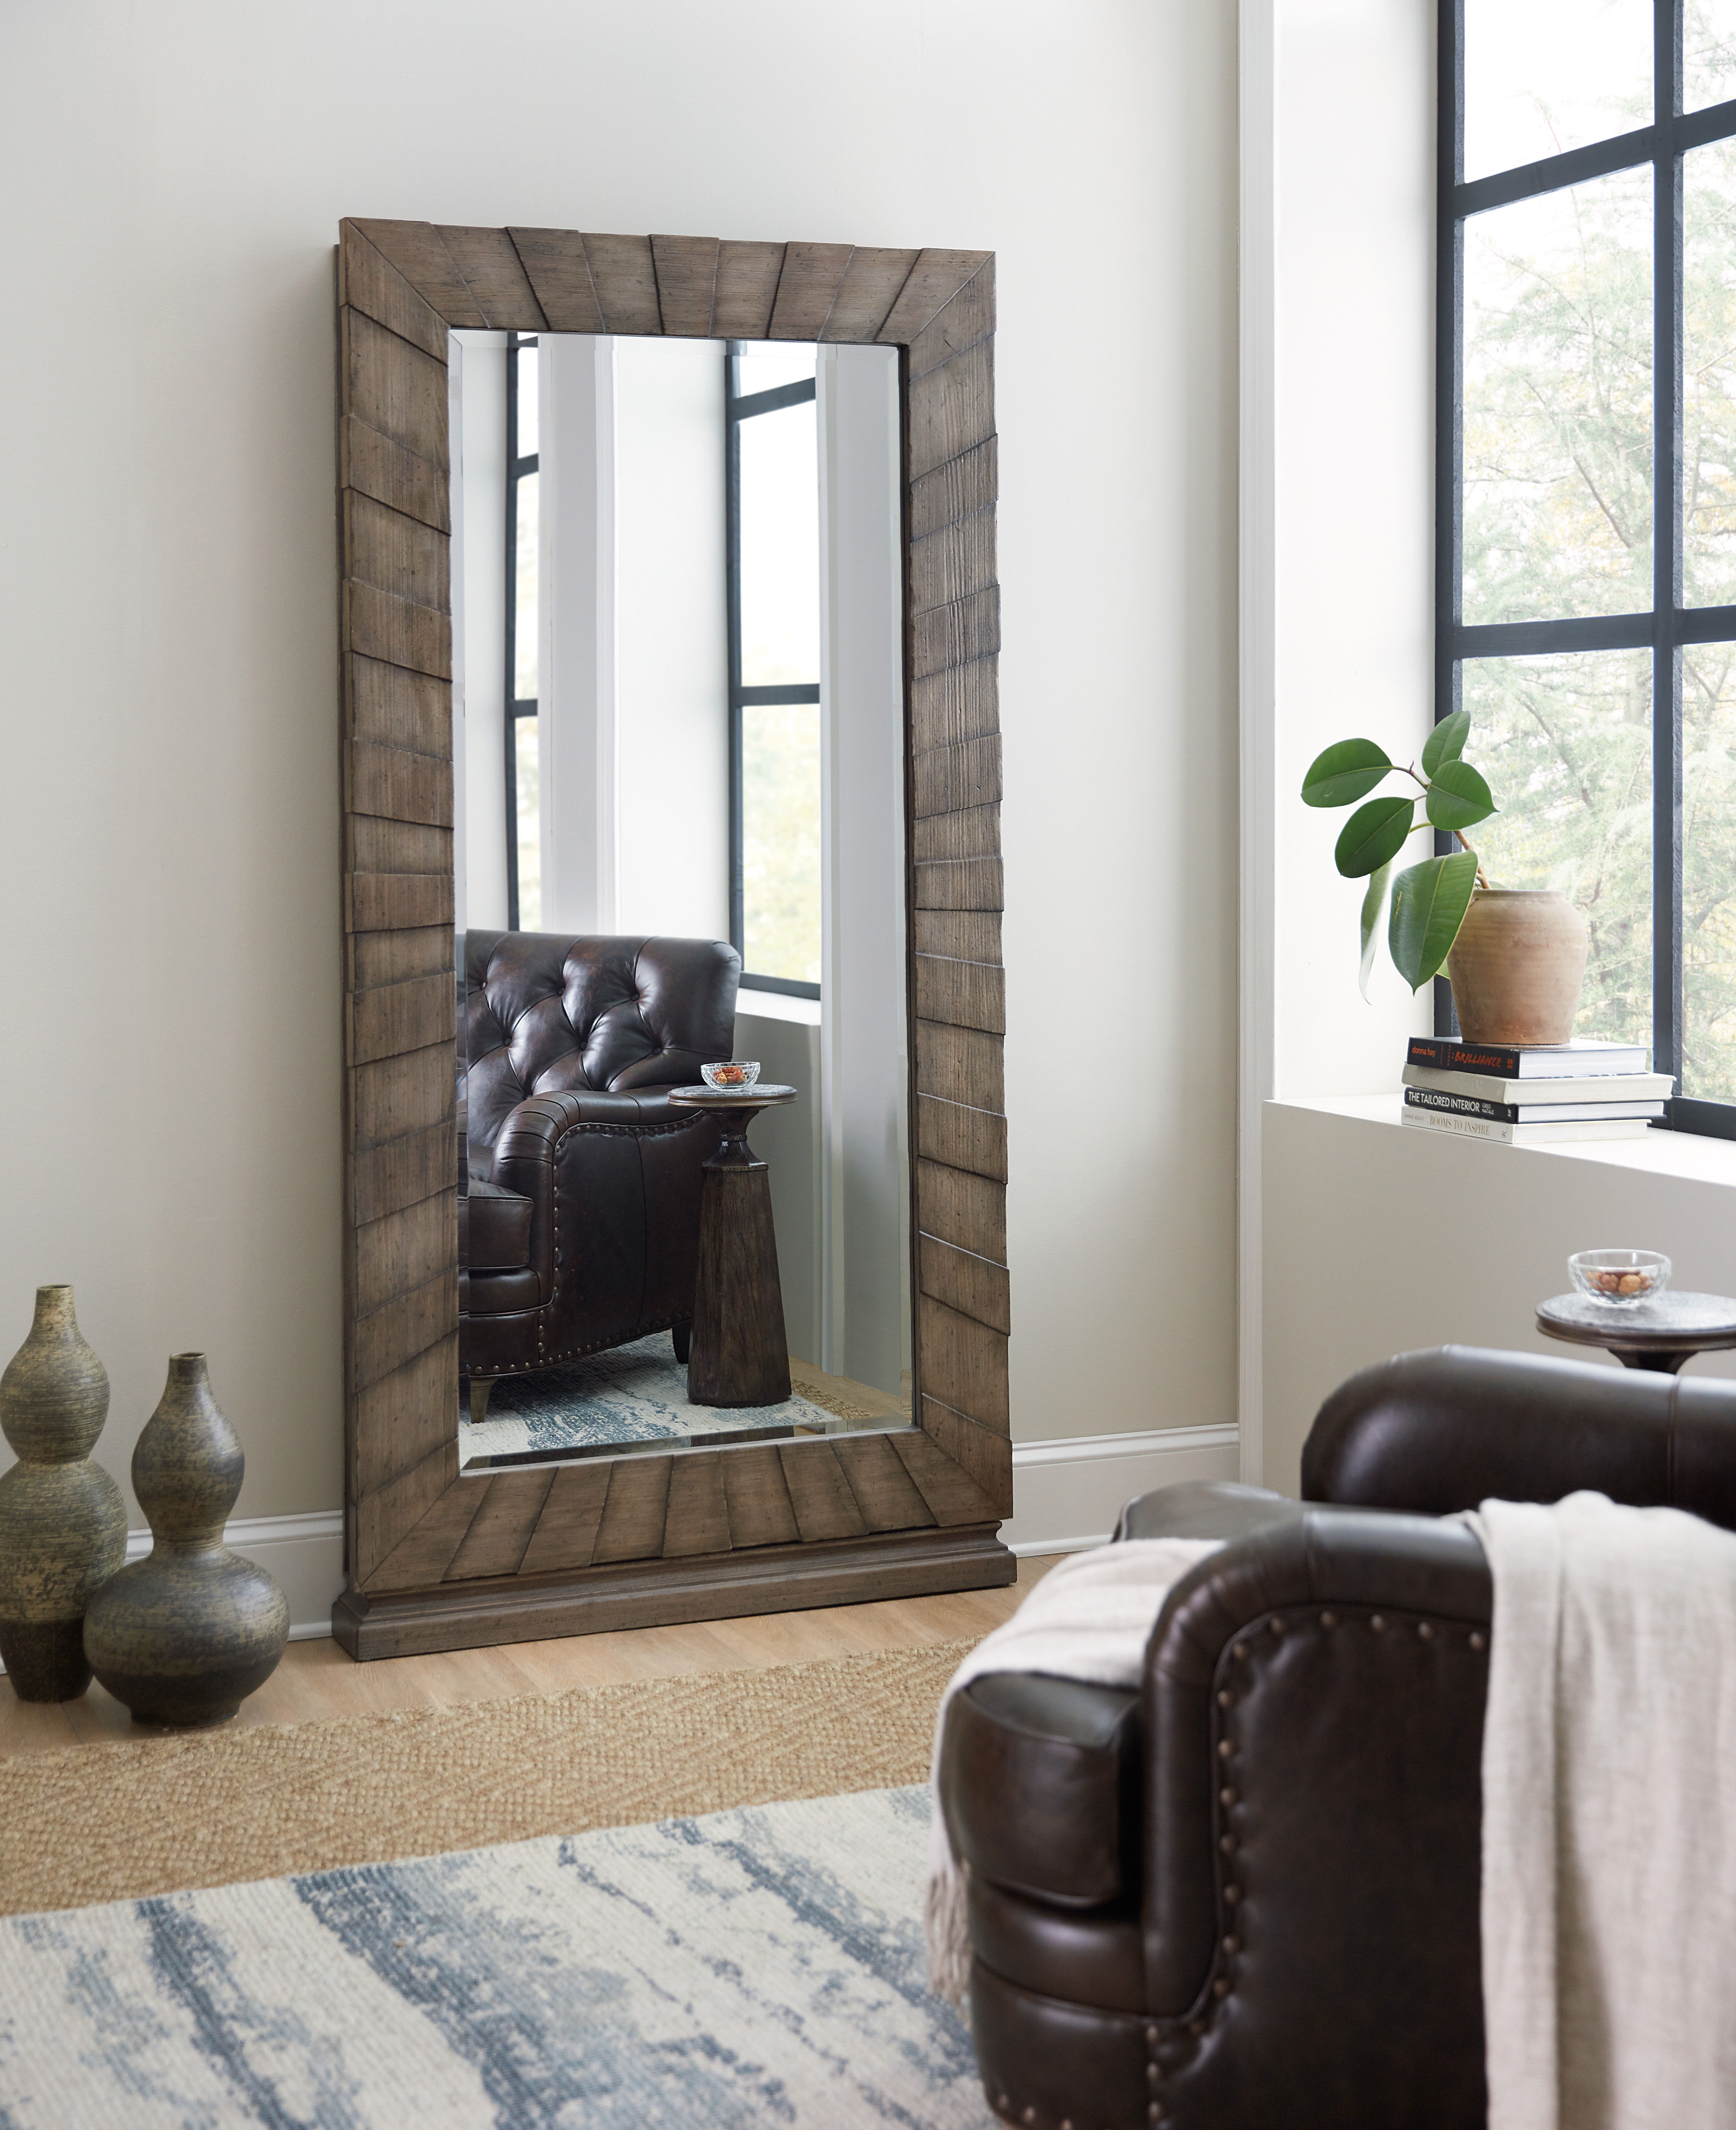 Floor Mirrors Decorative: Reflections Of Style And Beauty